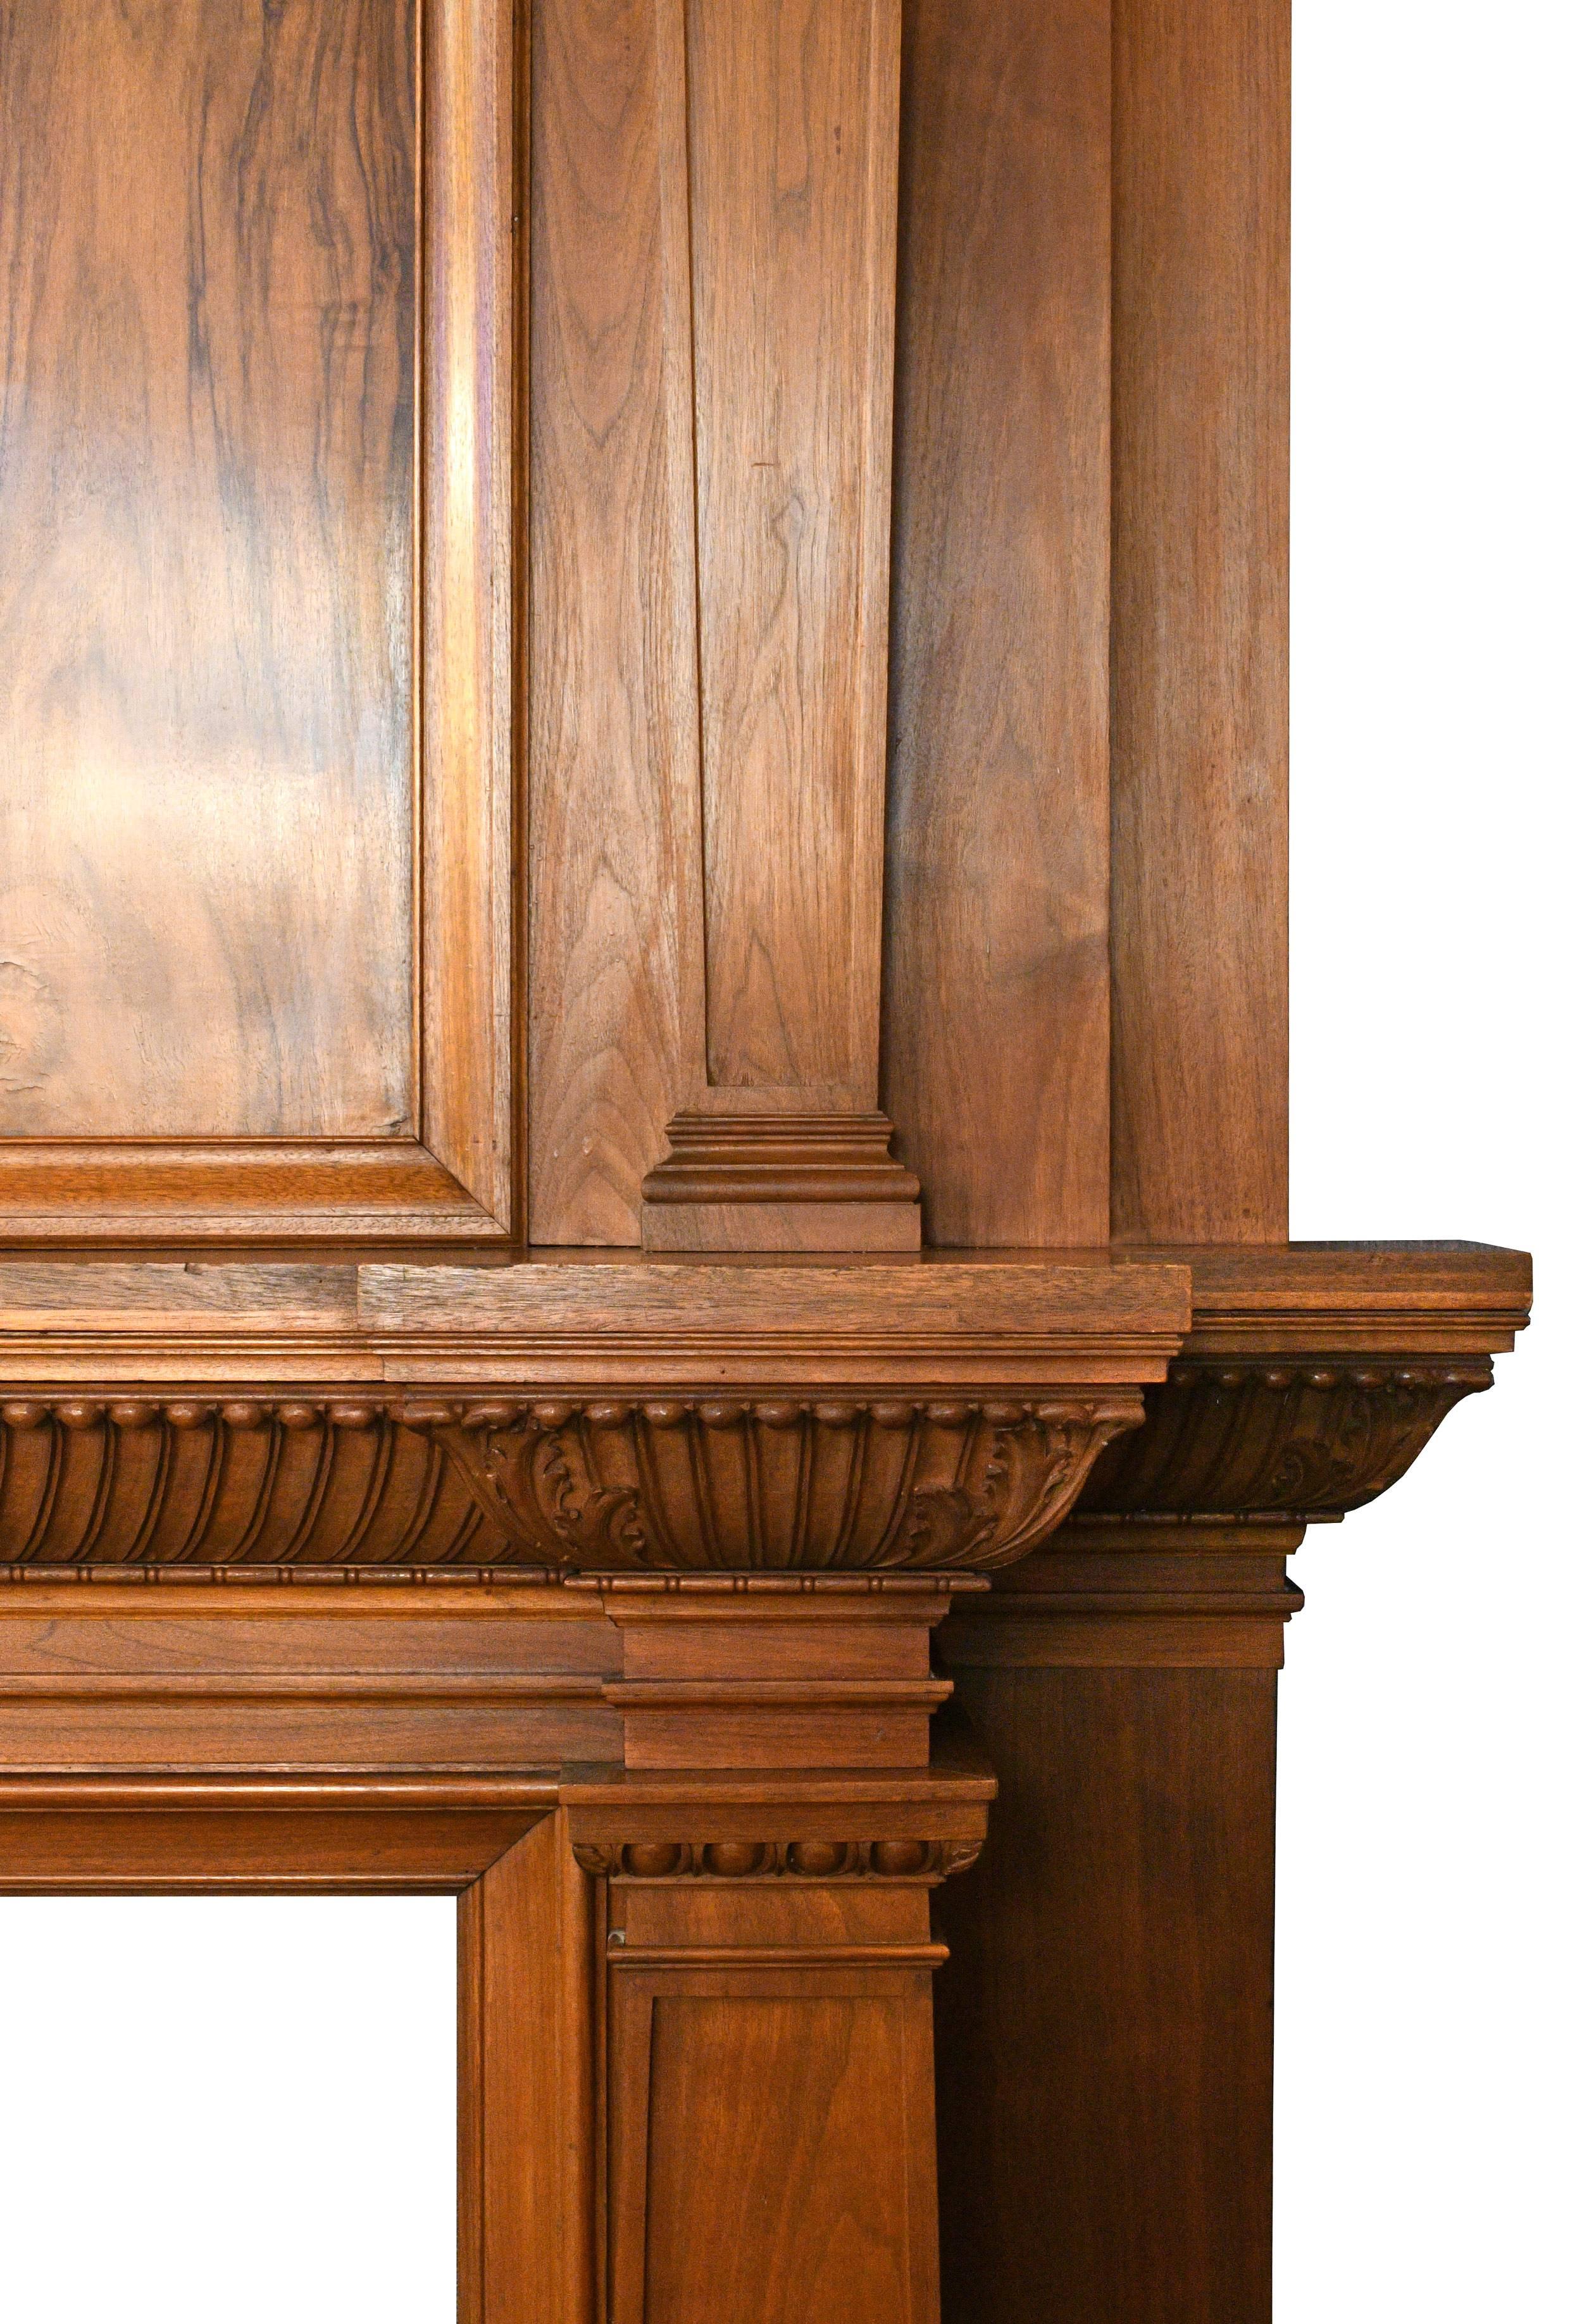 This beautiful over-sized mantel is made of burled walnut, sought after by craftsmen for its unique shapes and ring patterns. These particular patterns are more or less symmetrical, reminiscent of ink blots in a Rorschach test. The extremely